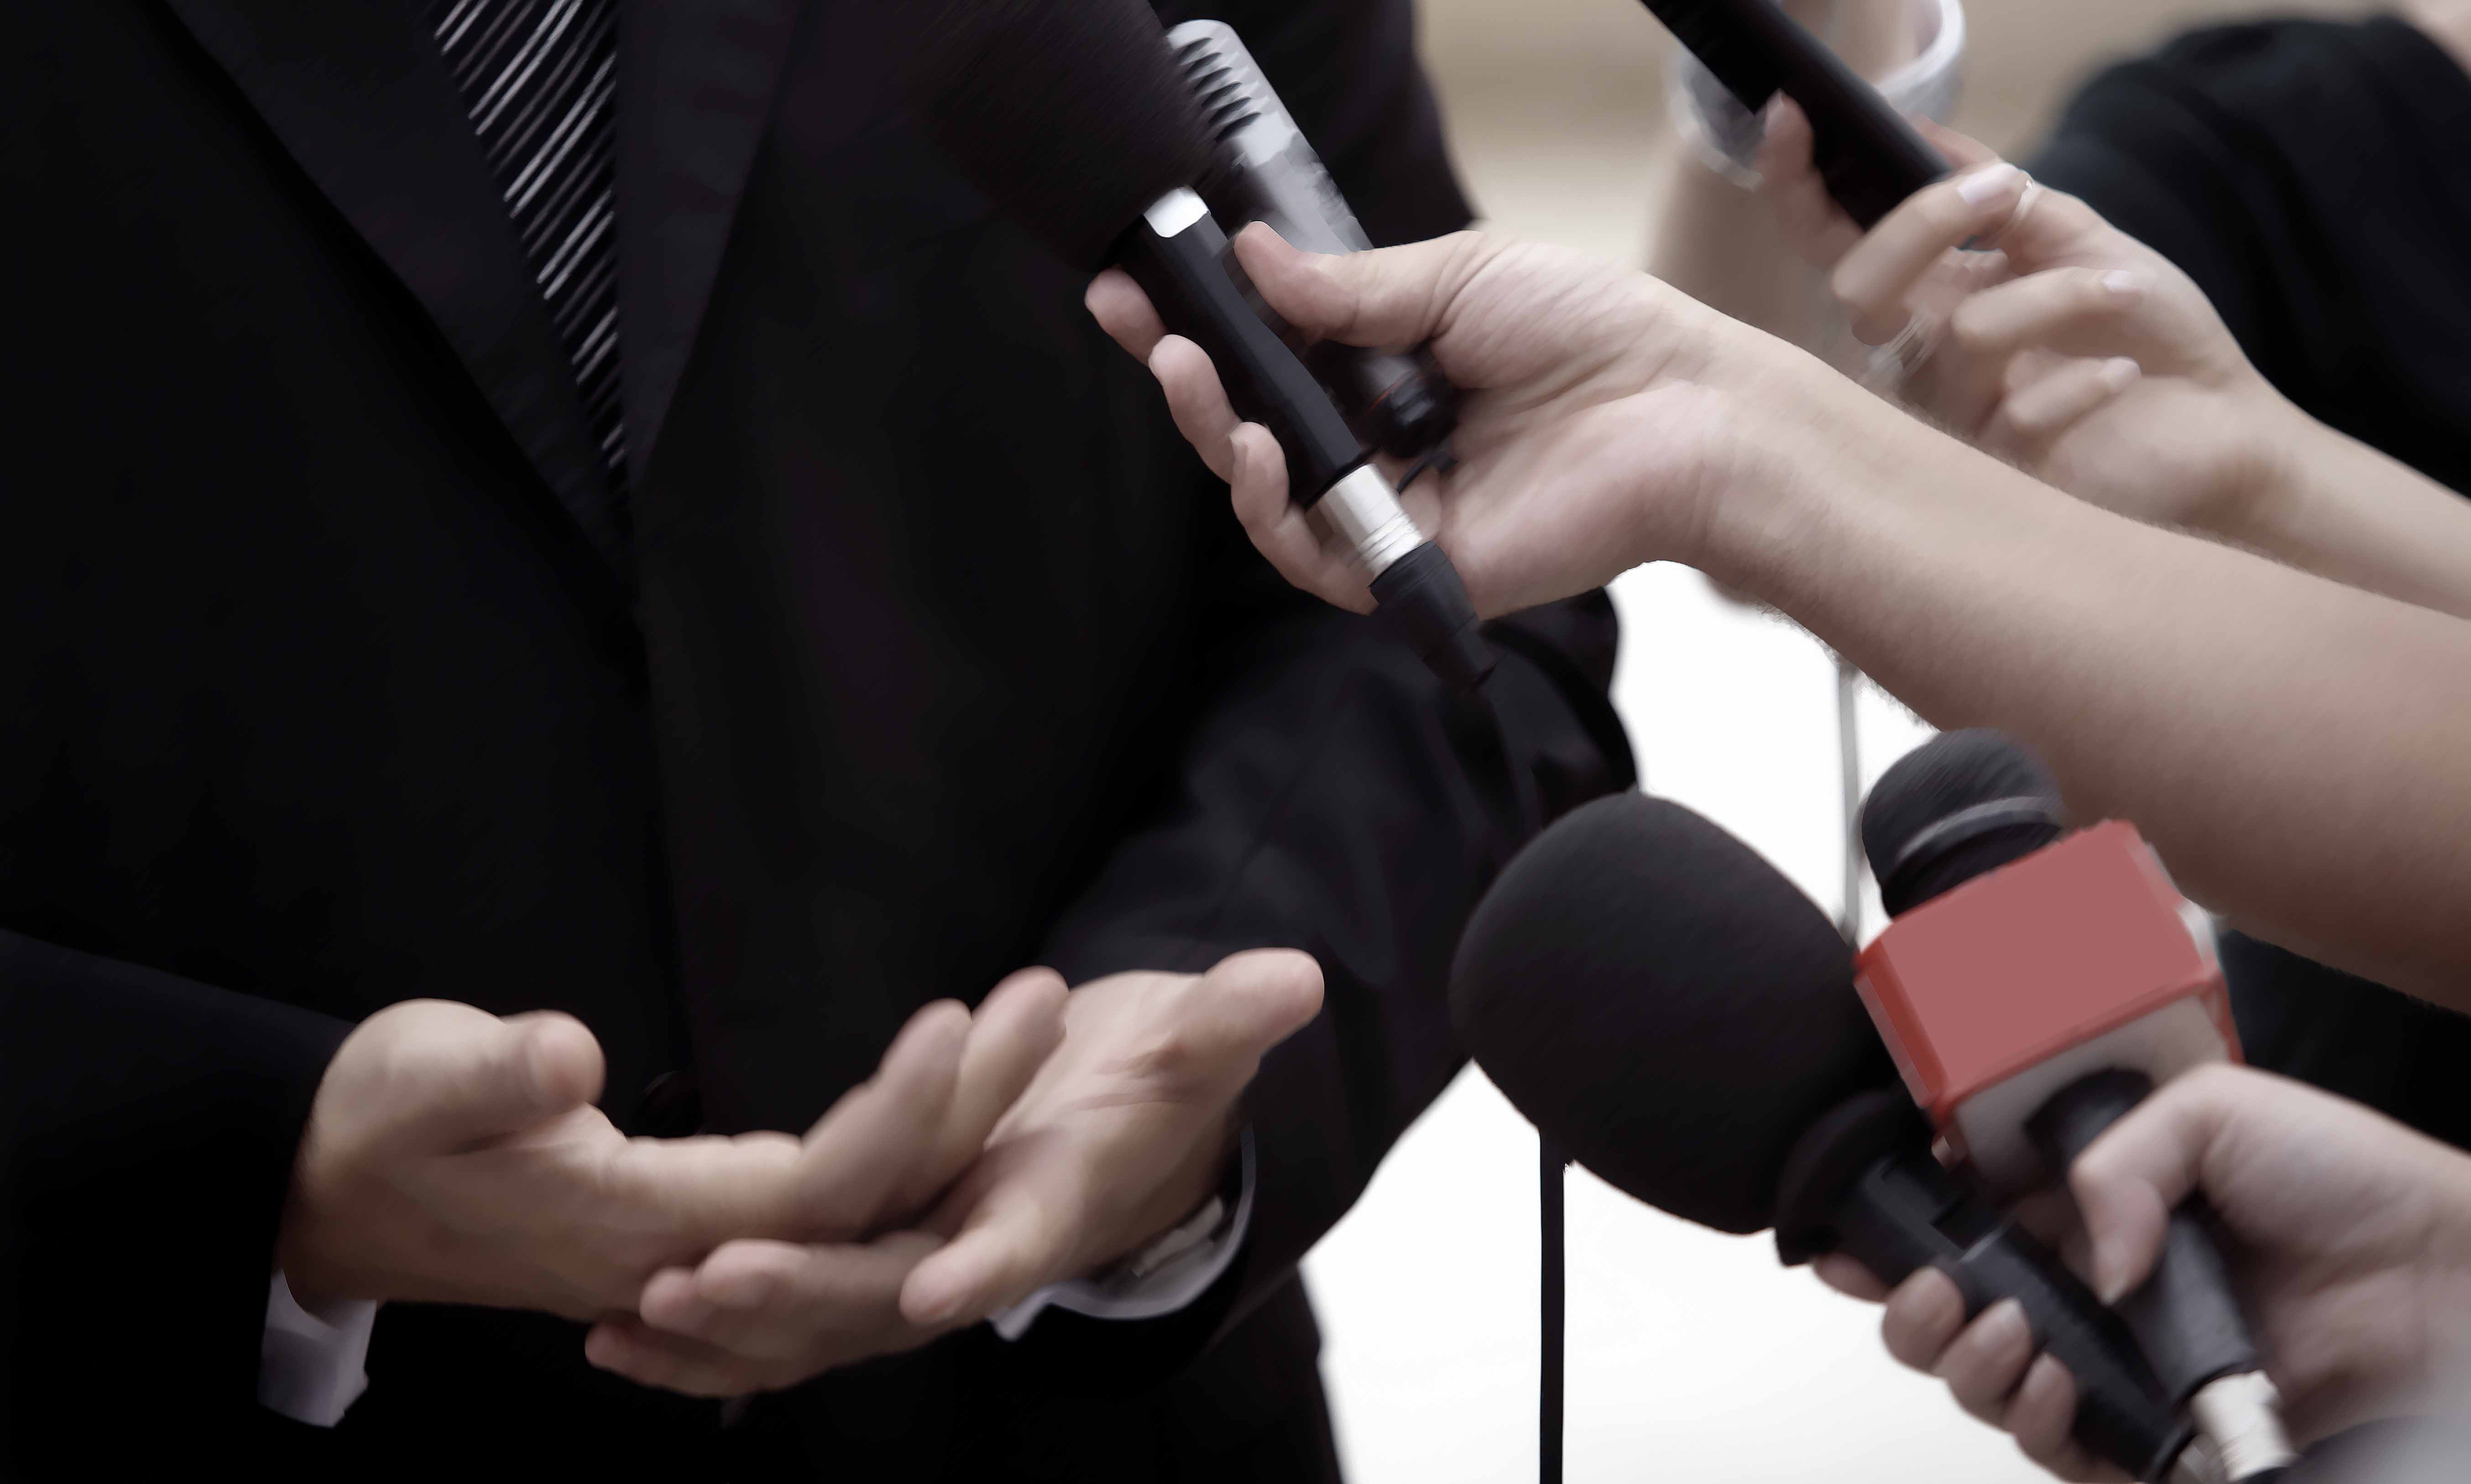 close up of conference meeting microphones and businessman